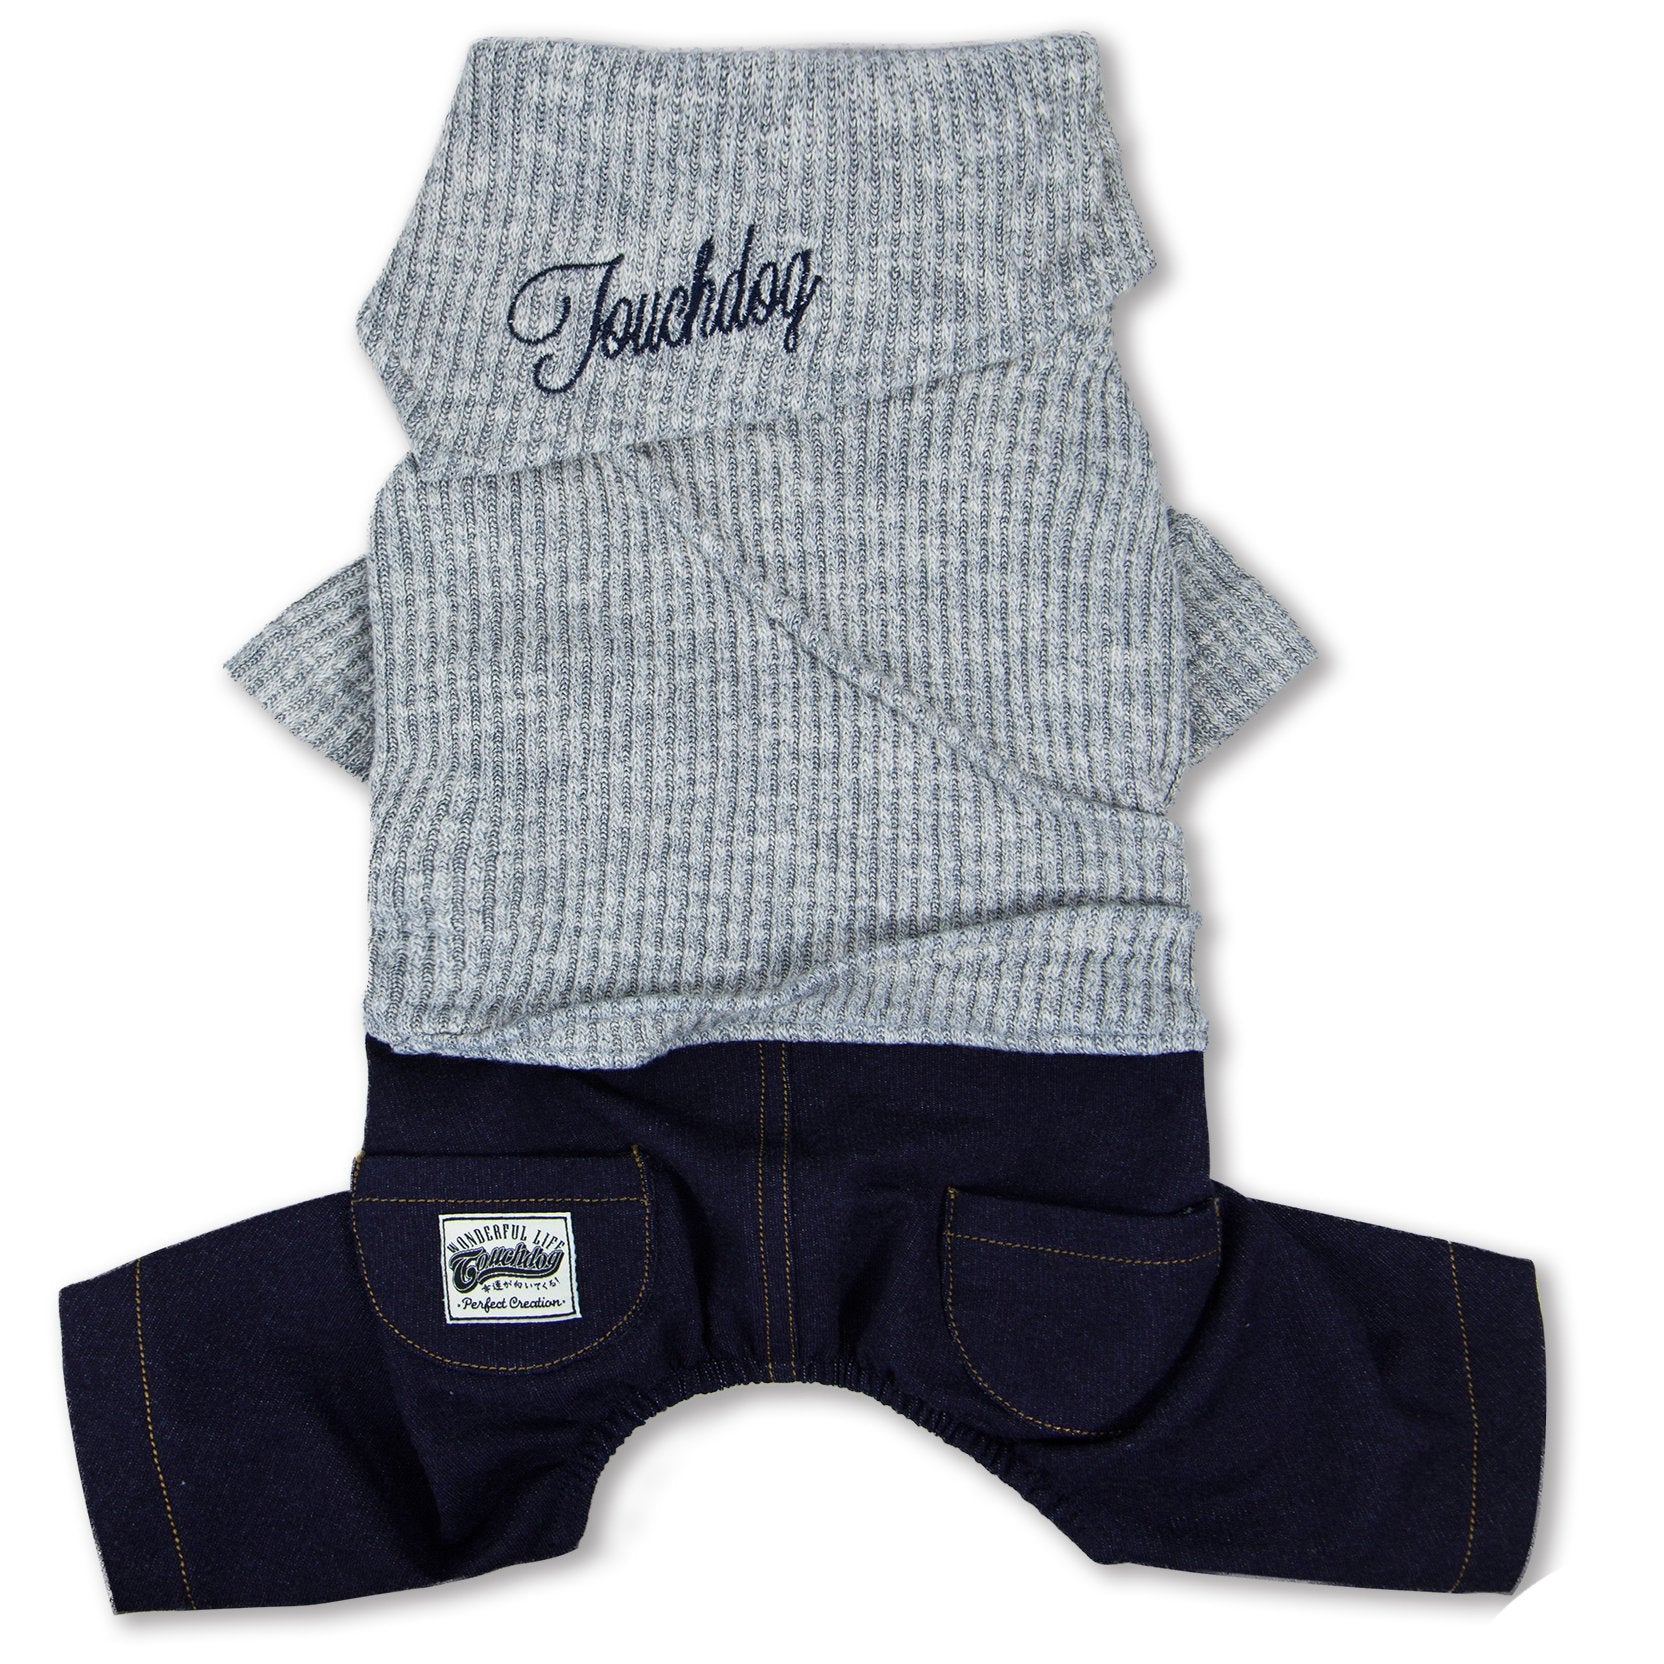 Touchdog Vogue Sweater & Denim Pant Outfit - Small - Grey